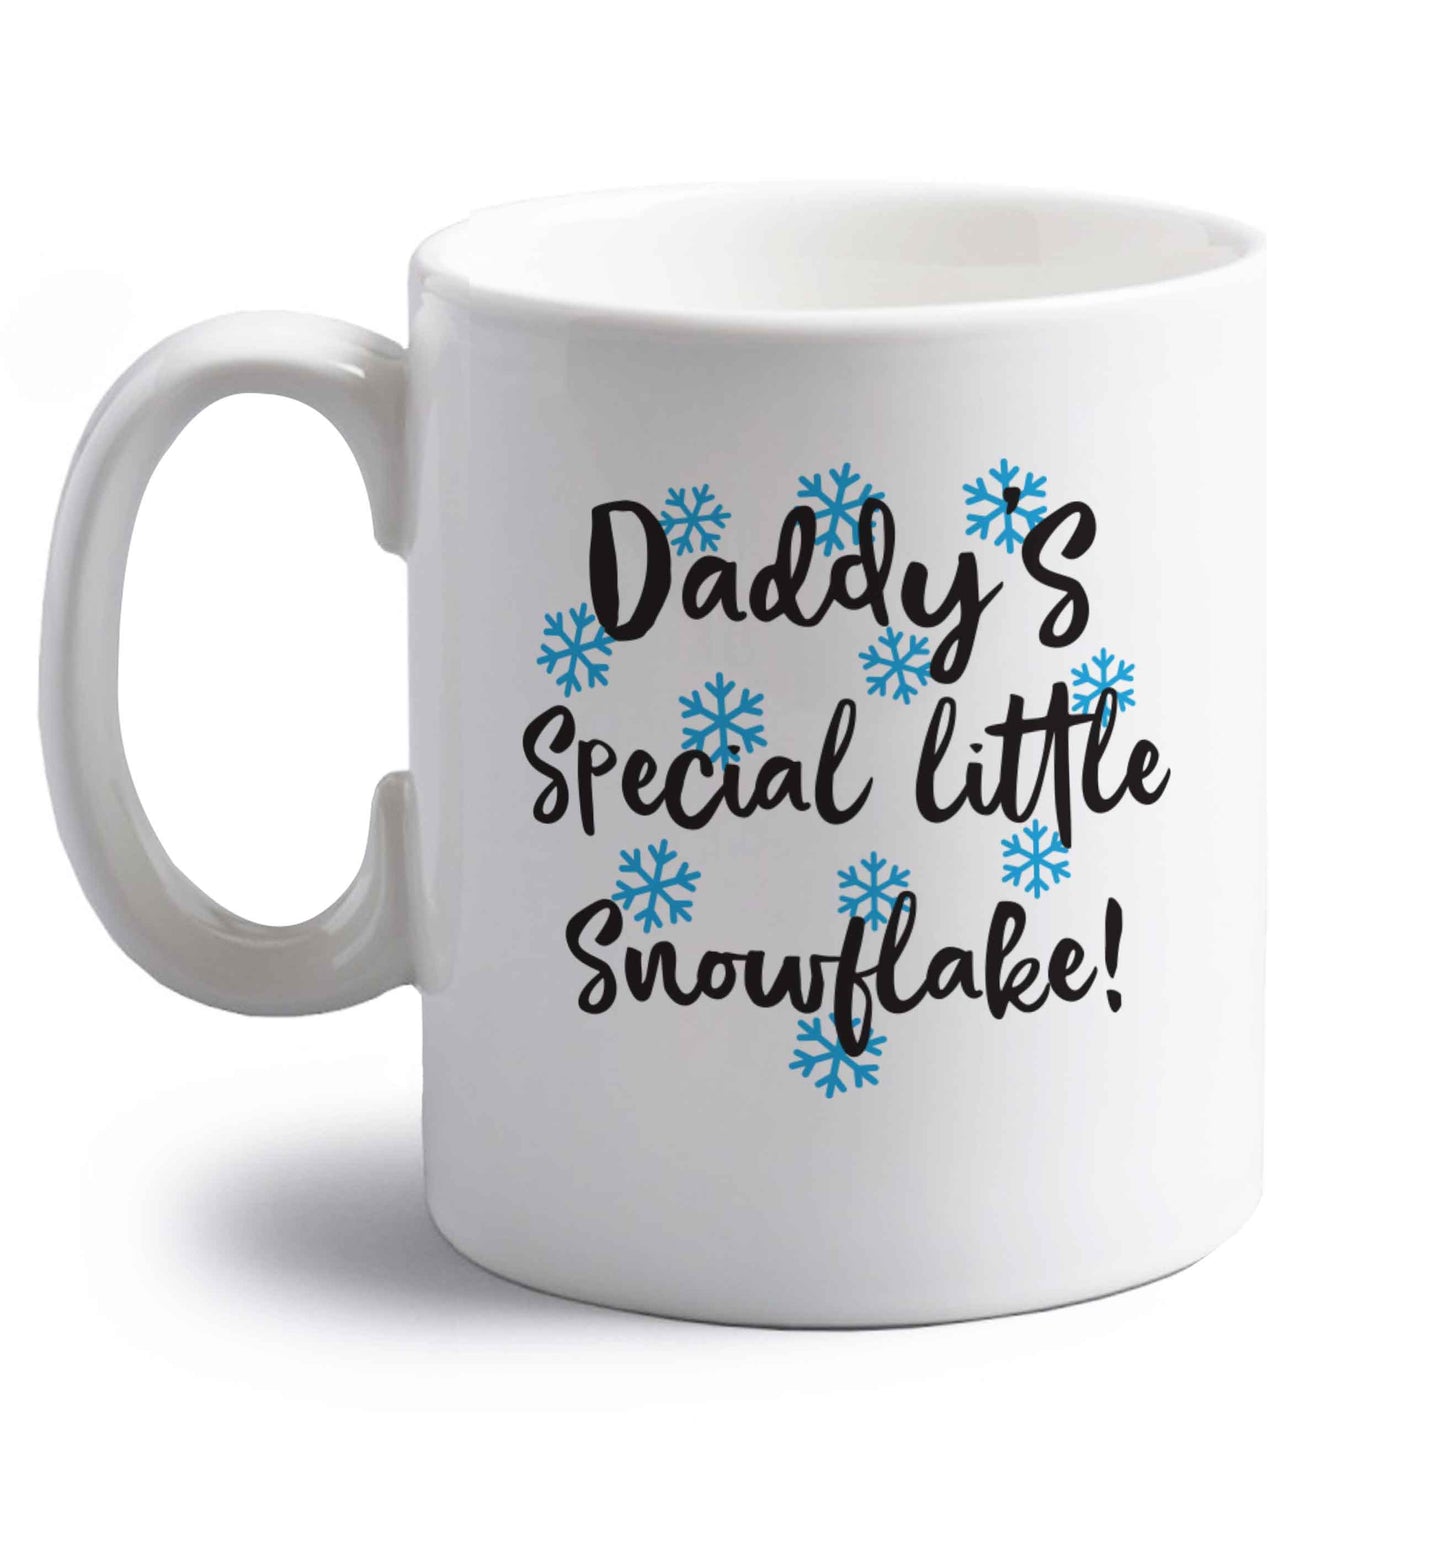 Daddy's special little snowflake right handed white ceramic mug 